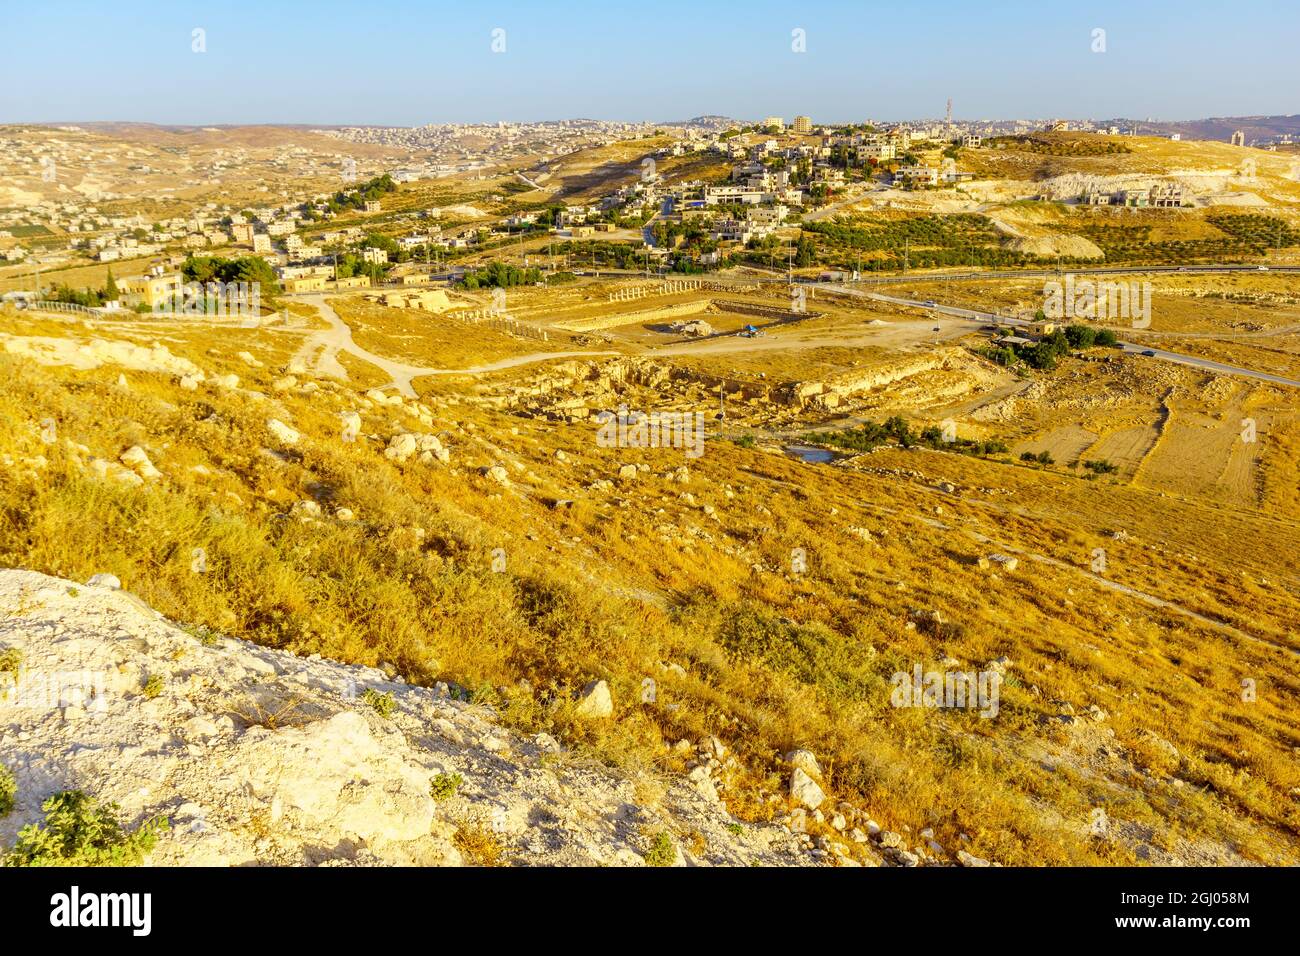 View towards the lower Herodium, the Judaean desert and Palestinian villages. The West Bank, South of Jerusalem Stock Photo